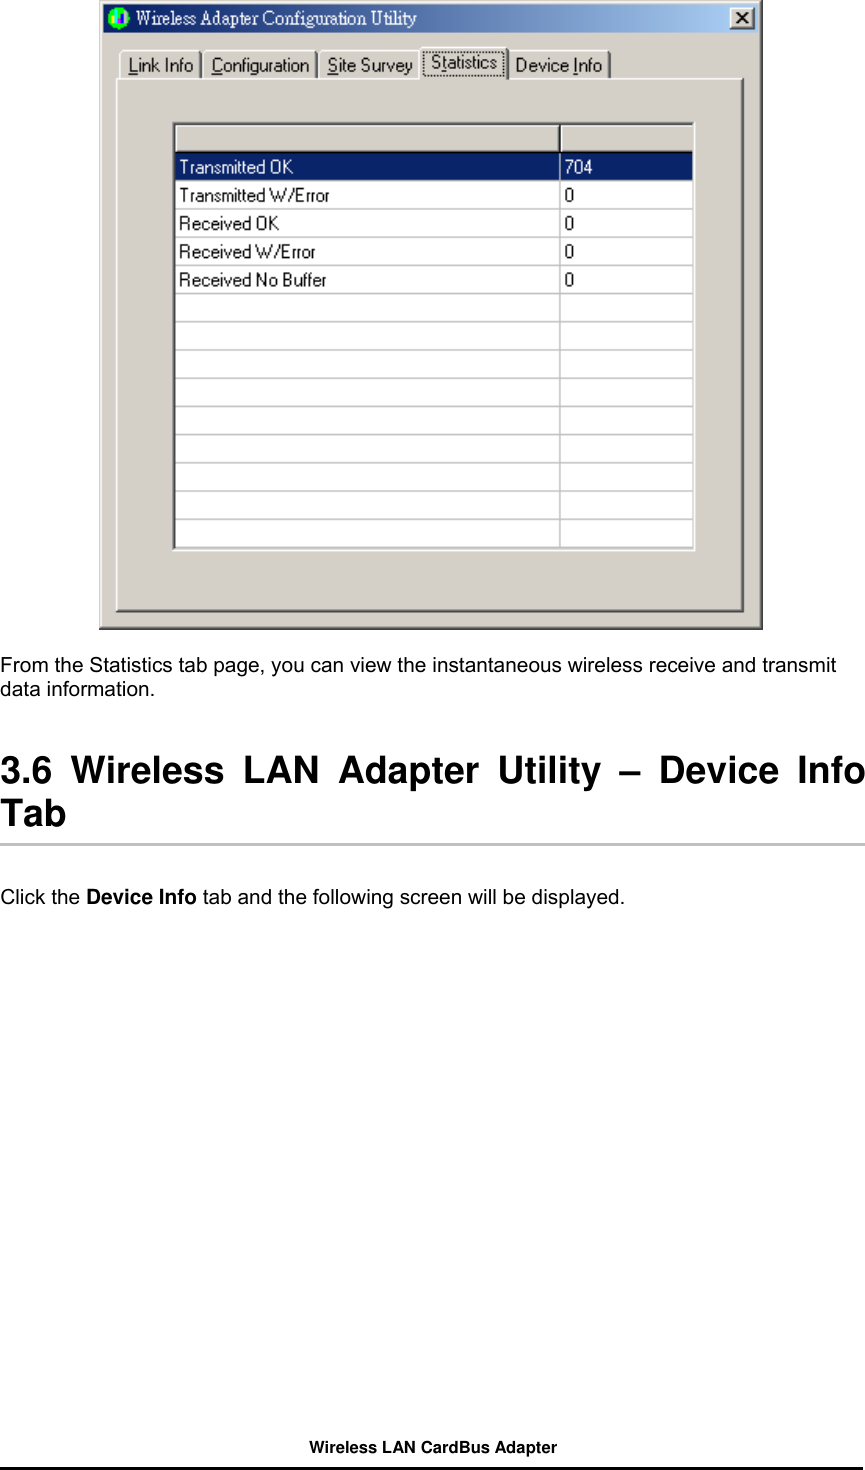   From the Statistics tab page, you can view the instantaneous wireless receive and transmit data information.     3.6 Wireless LAN Adapter Utility – Device Info Tab   Click the Device Info tab and the following screen will be displayed.   Wireless LAN CardBus Adapter 